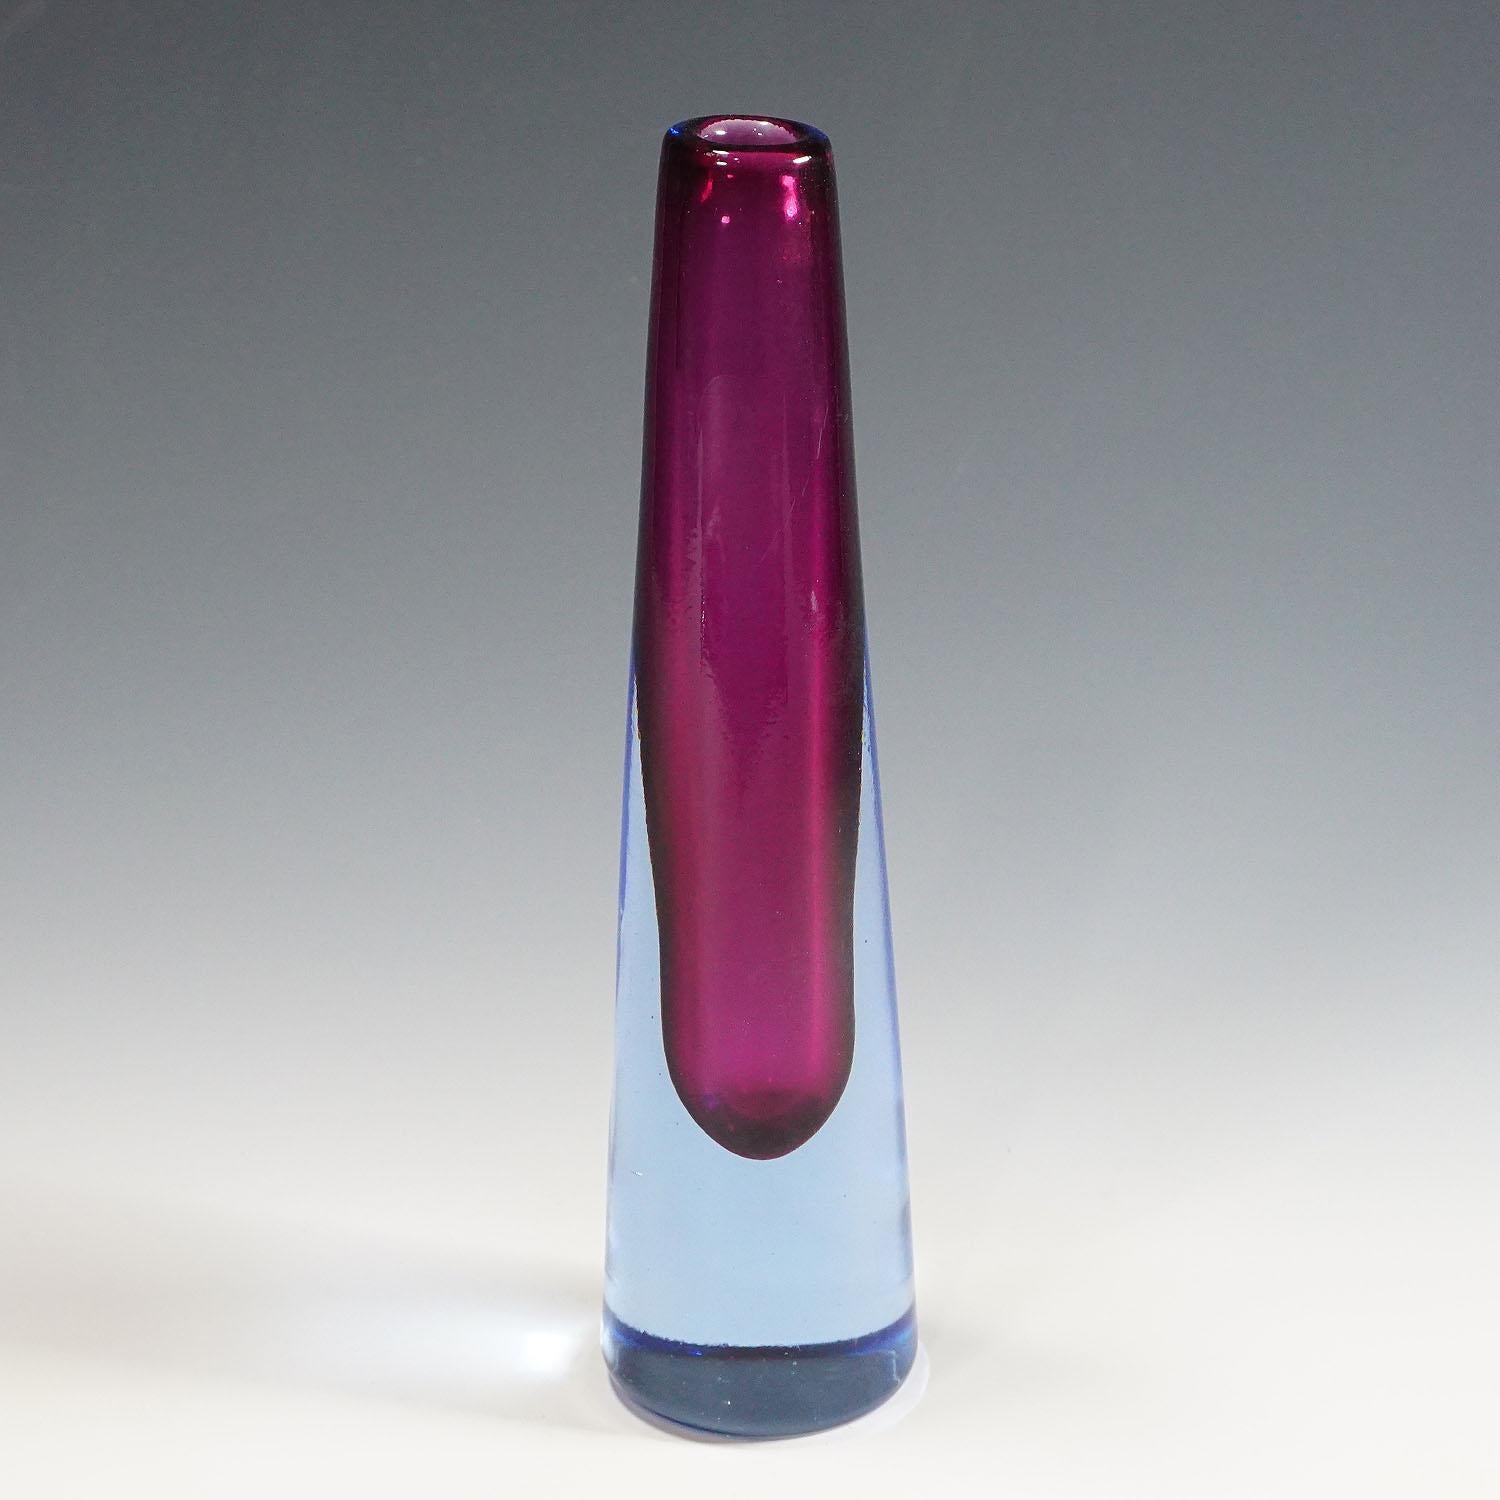 A vintage art glass vase in blue and violet sommerso glass. Manufactured by Salviati & Co., Venezia. Most probably designed by Lugiano Gaspari. Company label on the base 'salviati venezia'. Manufactured in Murano, circa 1960.

Measures: Height